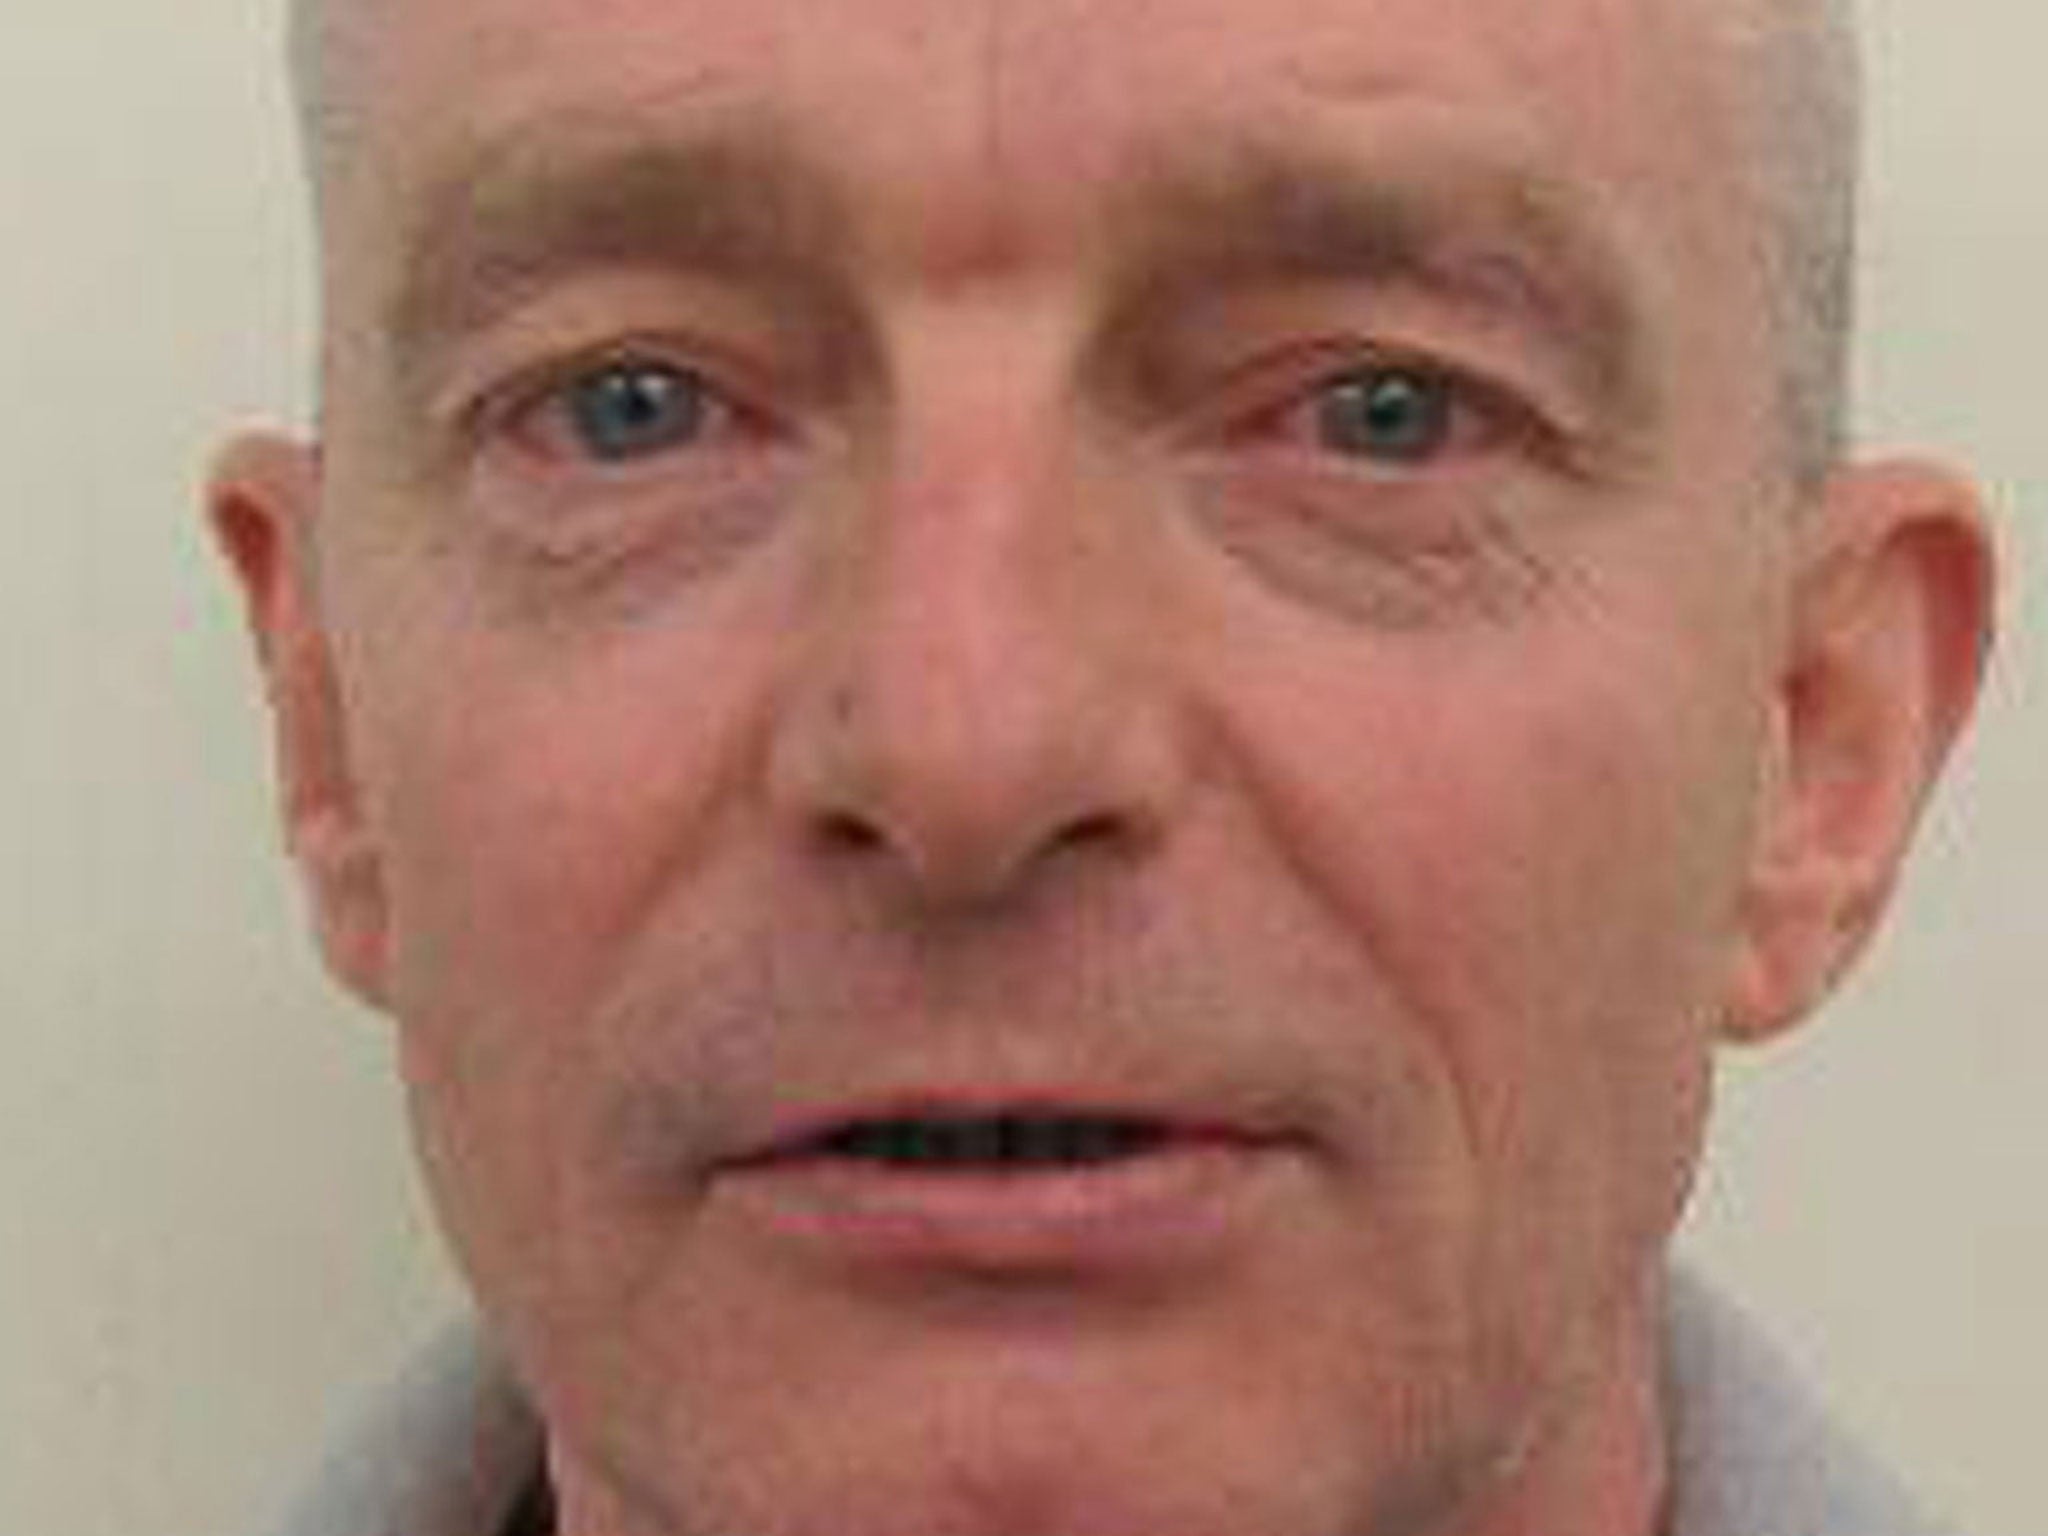 Ian John McLoughlin, who is being sought for the stabbing, is believed to have recently come out of prison